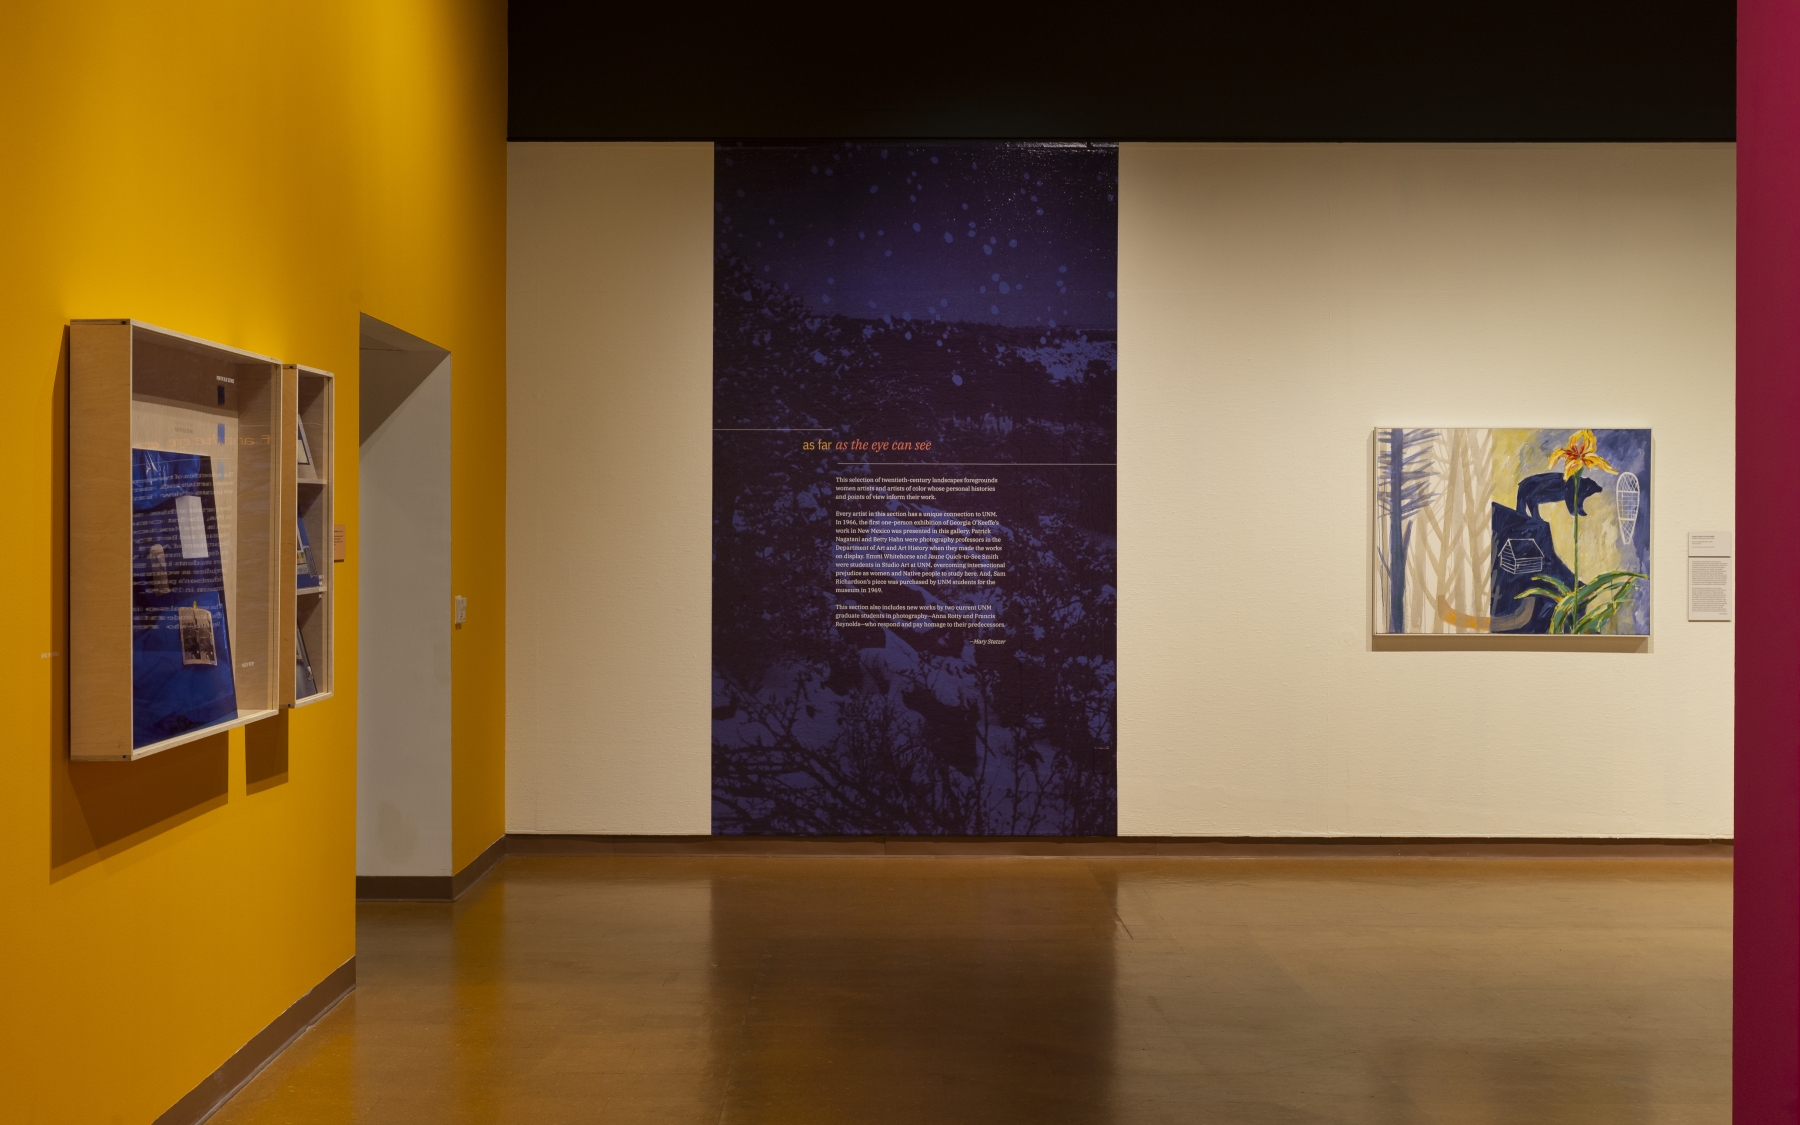 Hindsight Insight 2.0: Portraits, Landscapes, and Abstraction from the UNM Art Museum